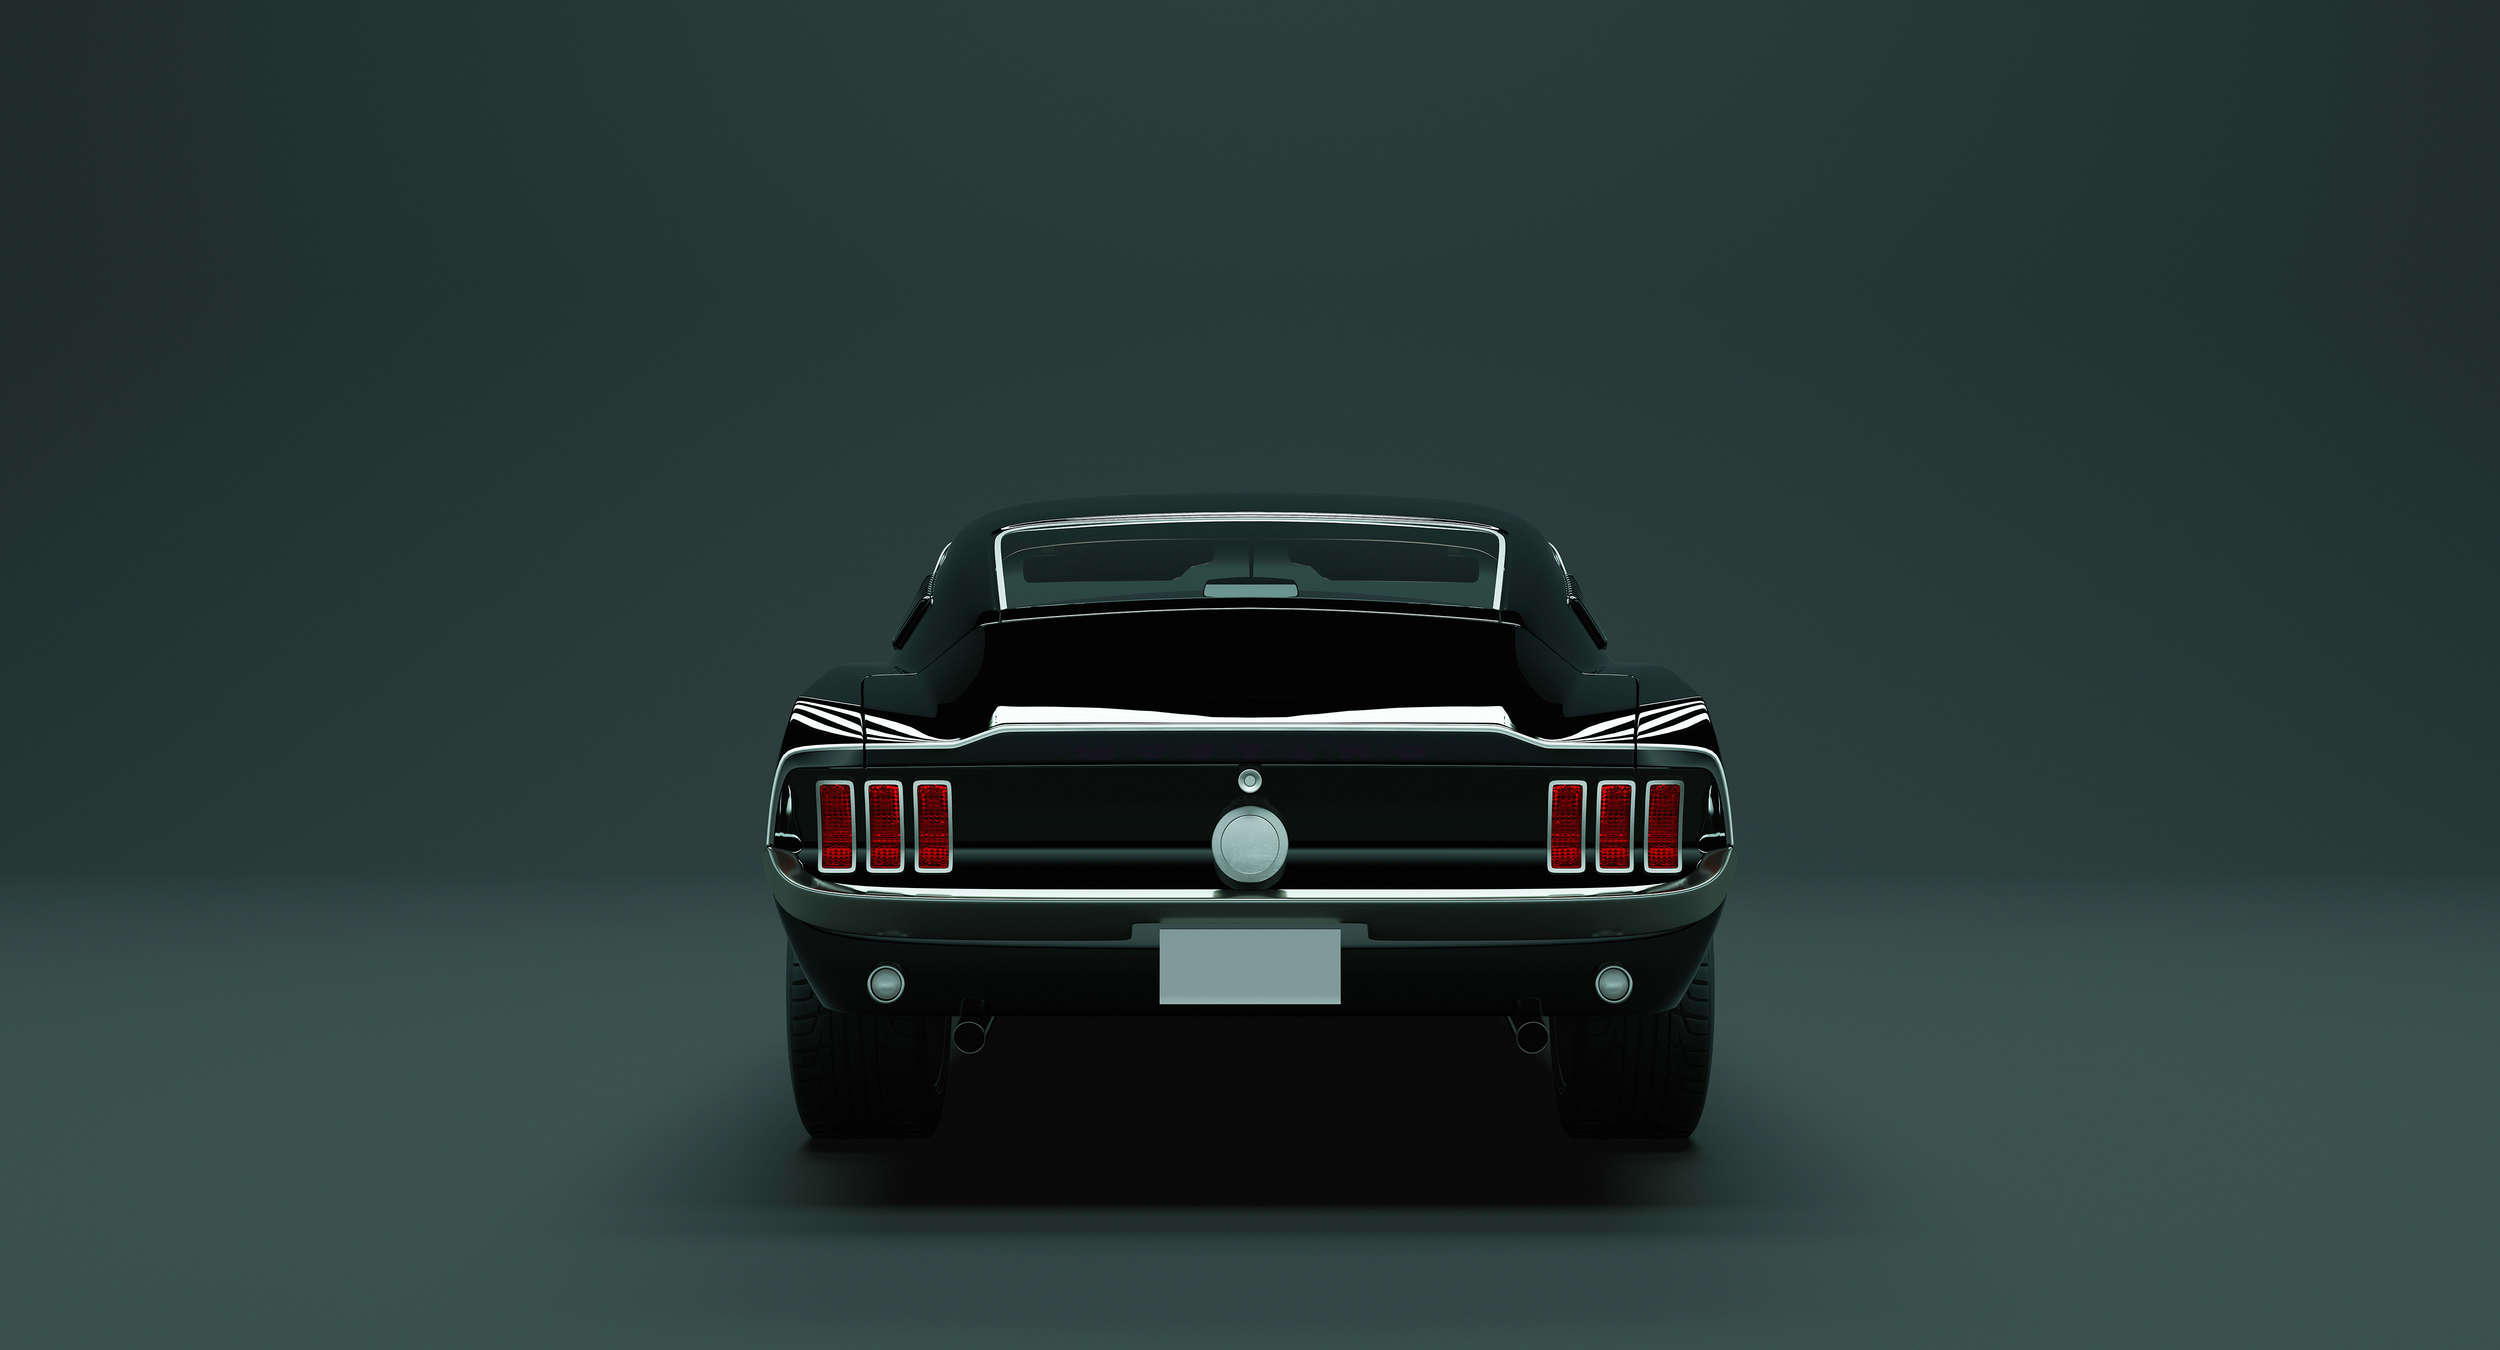             Mustang 3 - American Muscle Car Wallpaper - Blue, Black | Textured Non-woven
        